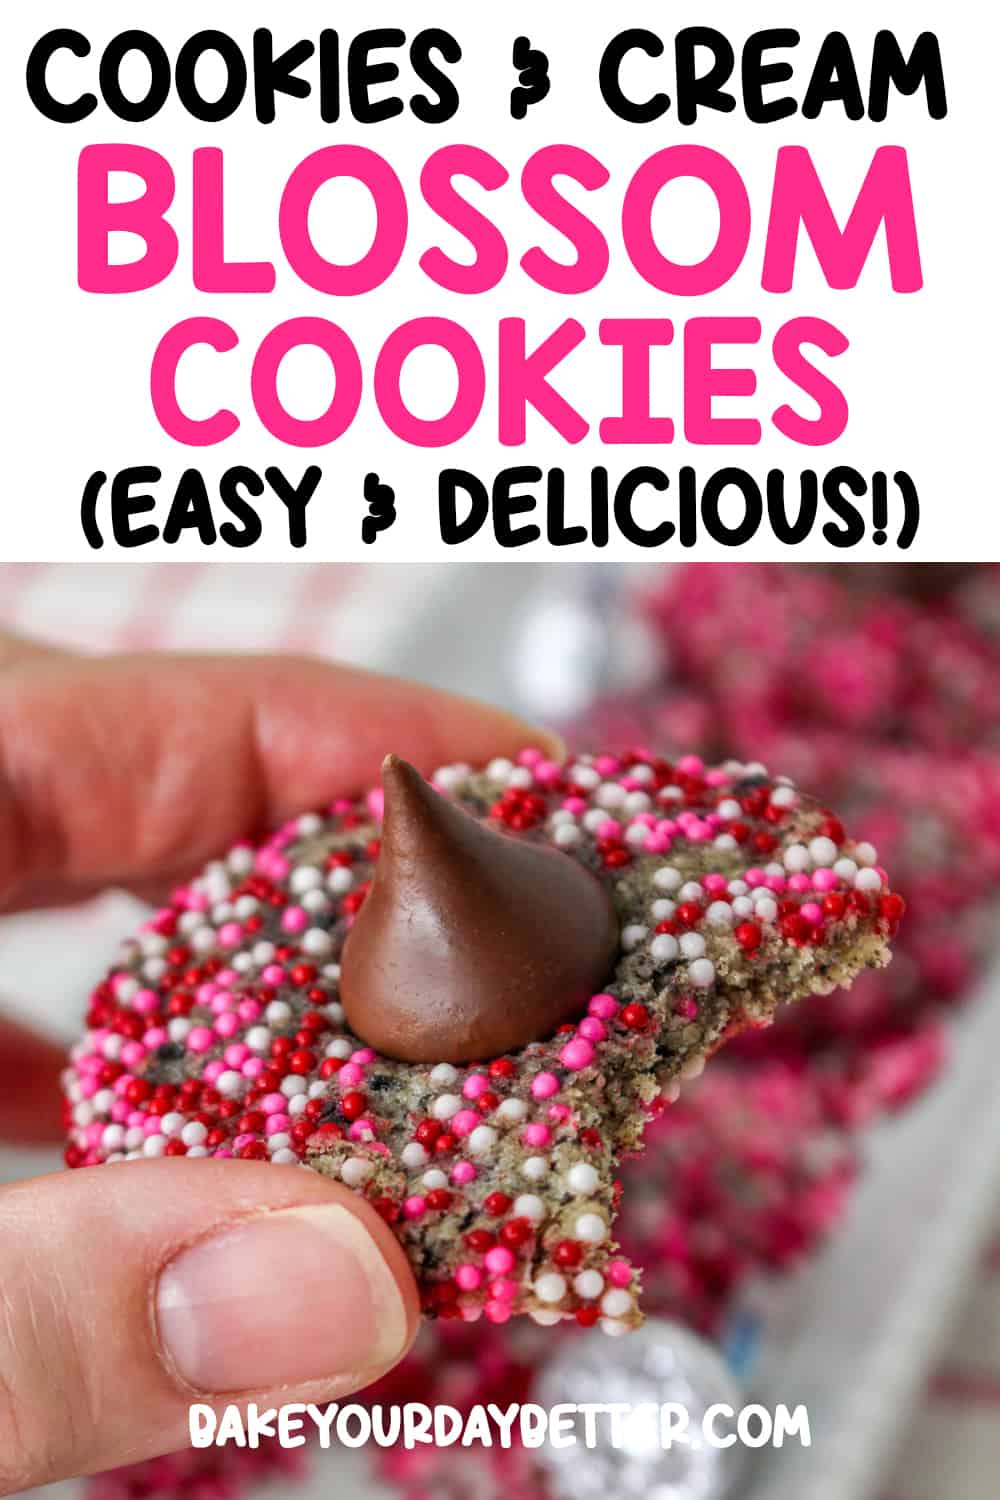 cookies and cream blossom cookie with text overlay that says: cookies and cream blossom cookies (easy and delicious!)